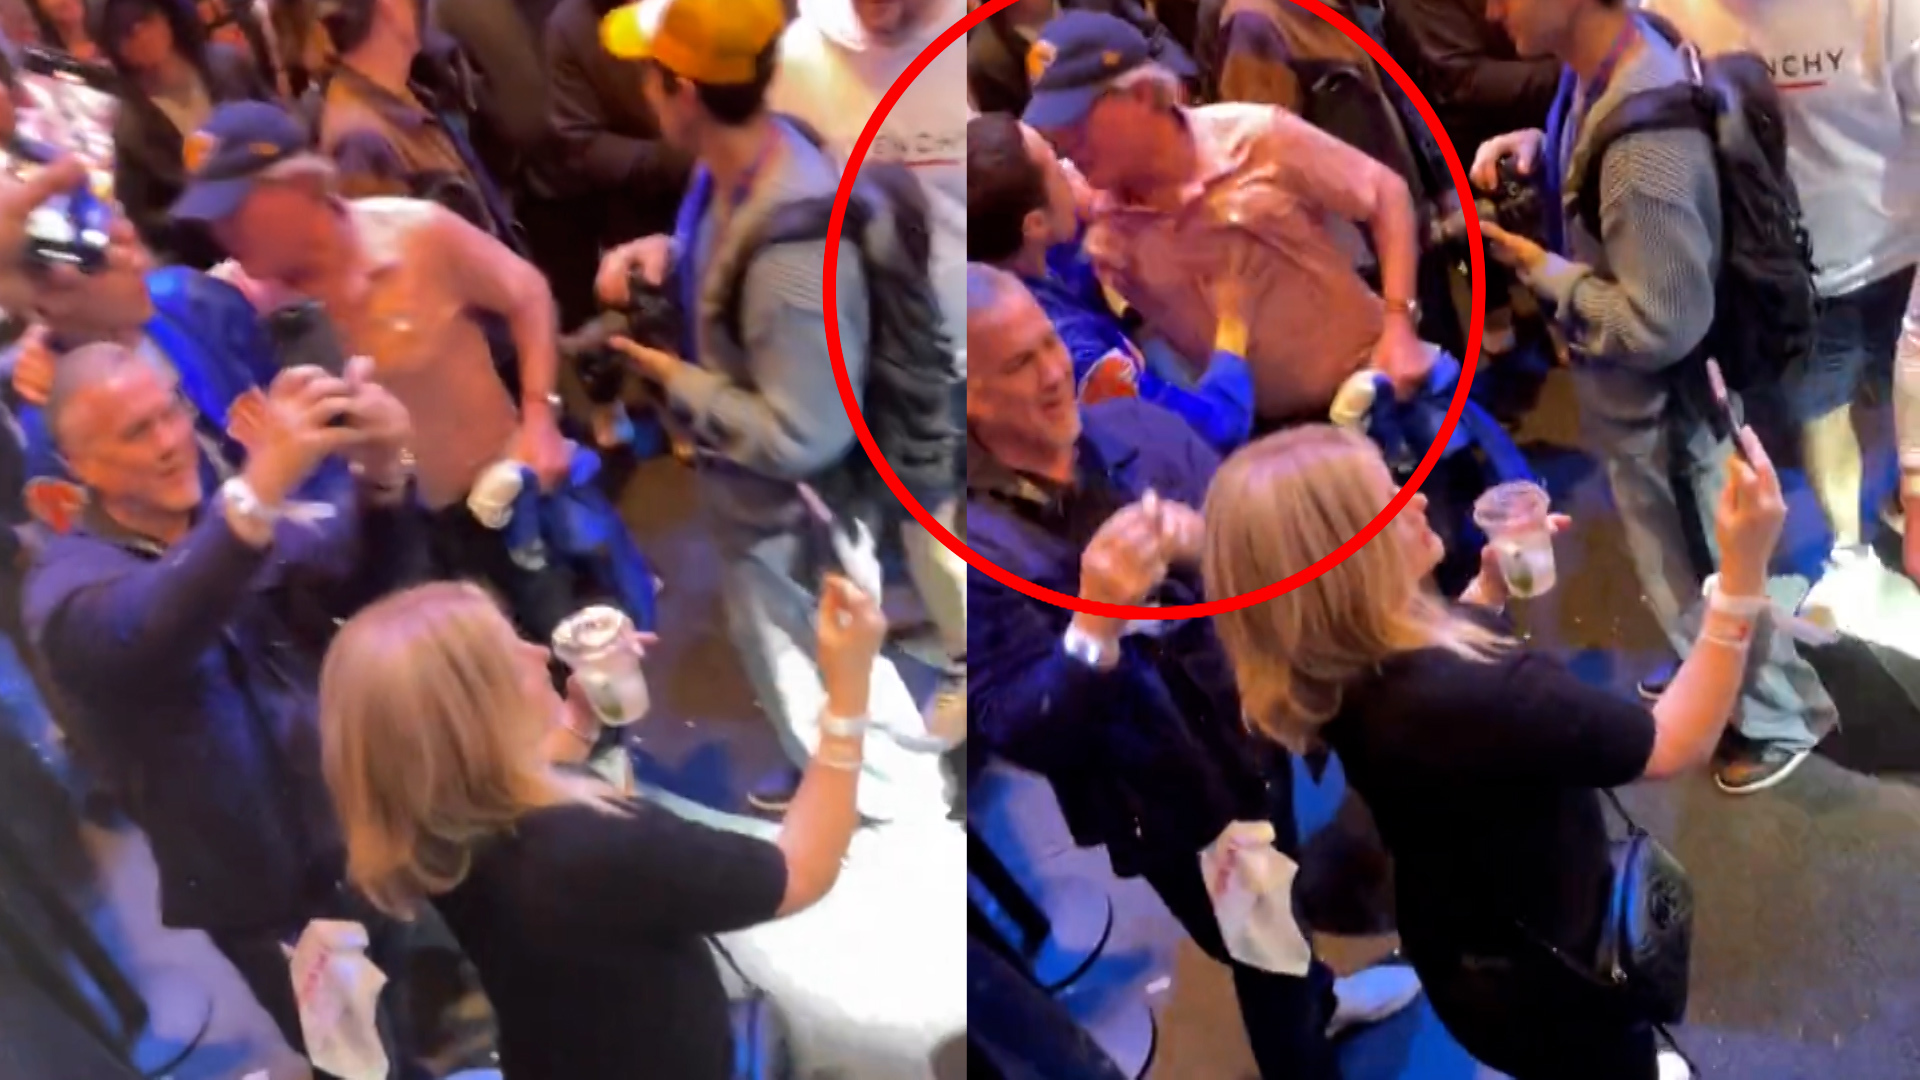 Pete Davidson gets physical with touchy Knicks fan at Madison Square Garden